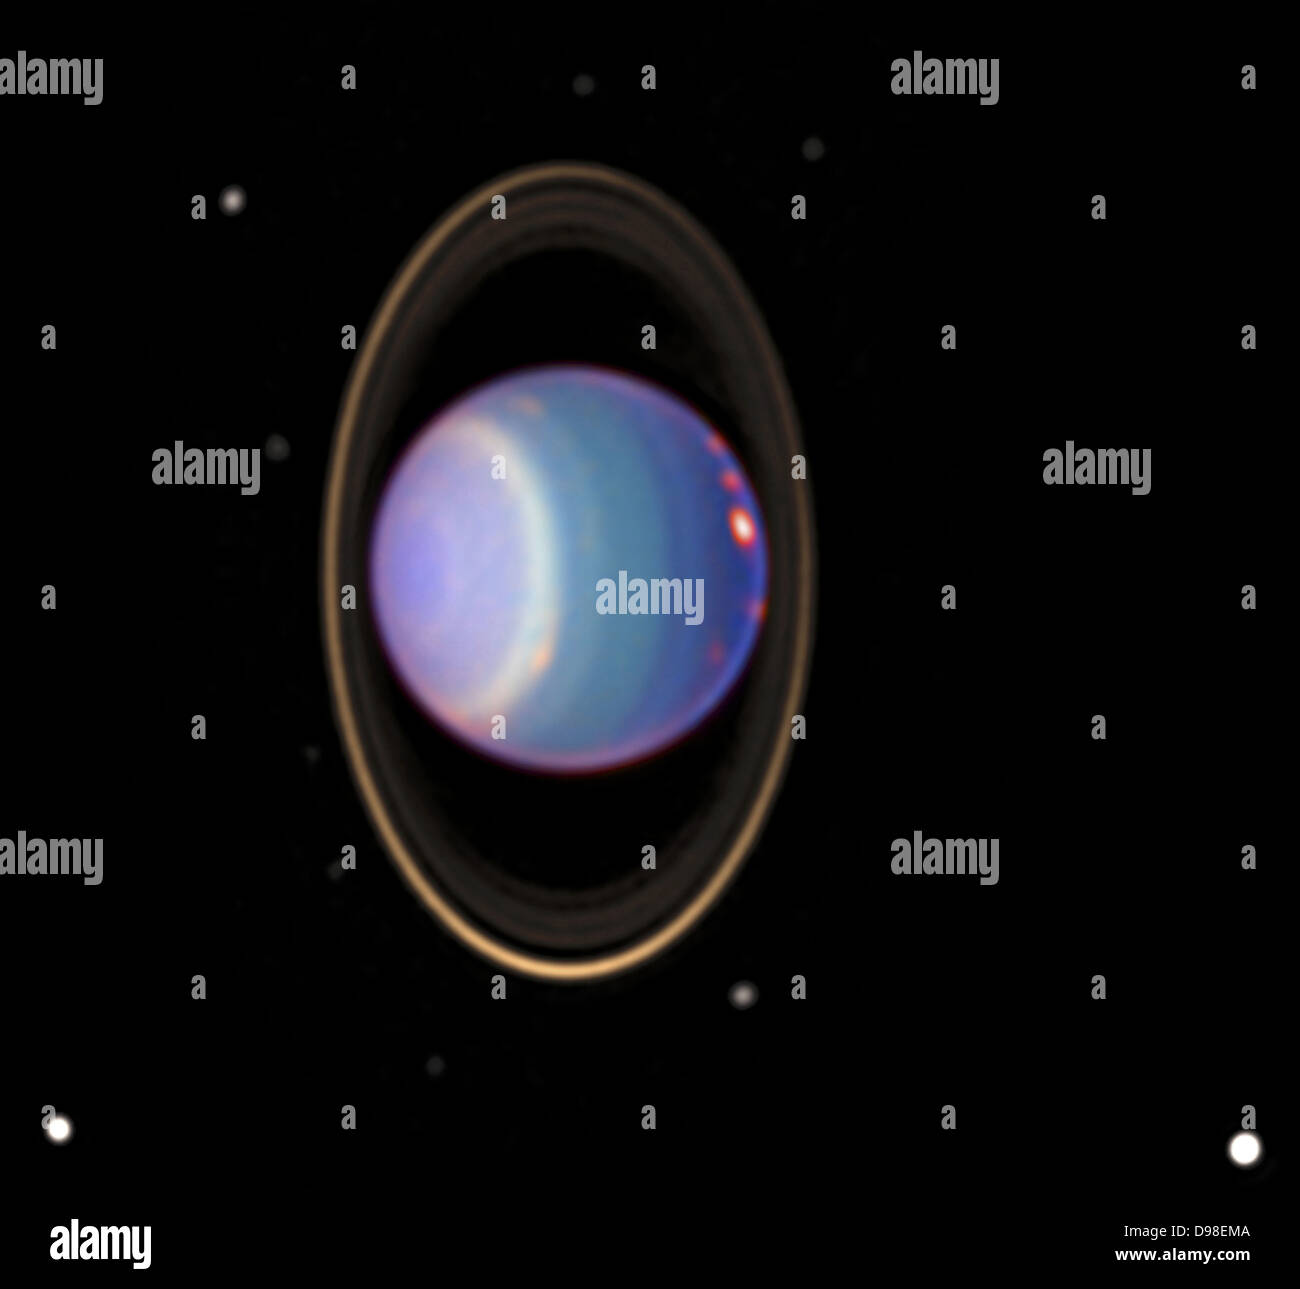 A recent Hubble Space Telescope (HST) view reveals Uranus surrounded by its 4 major rings and 10 of its 17 known satellites Stock Photo